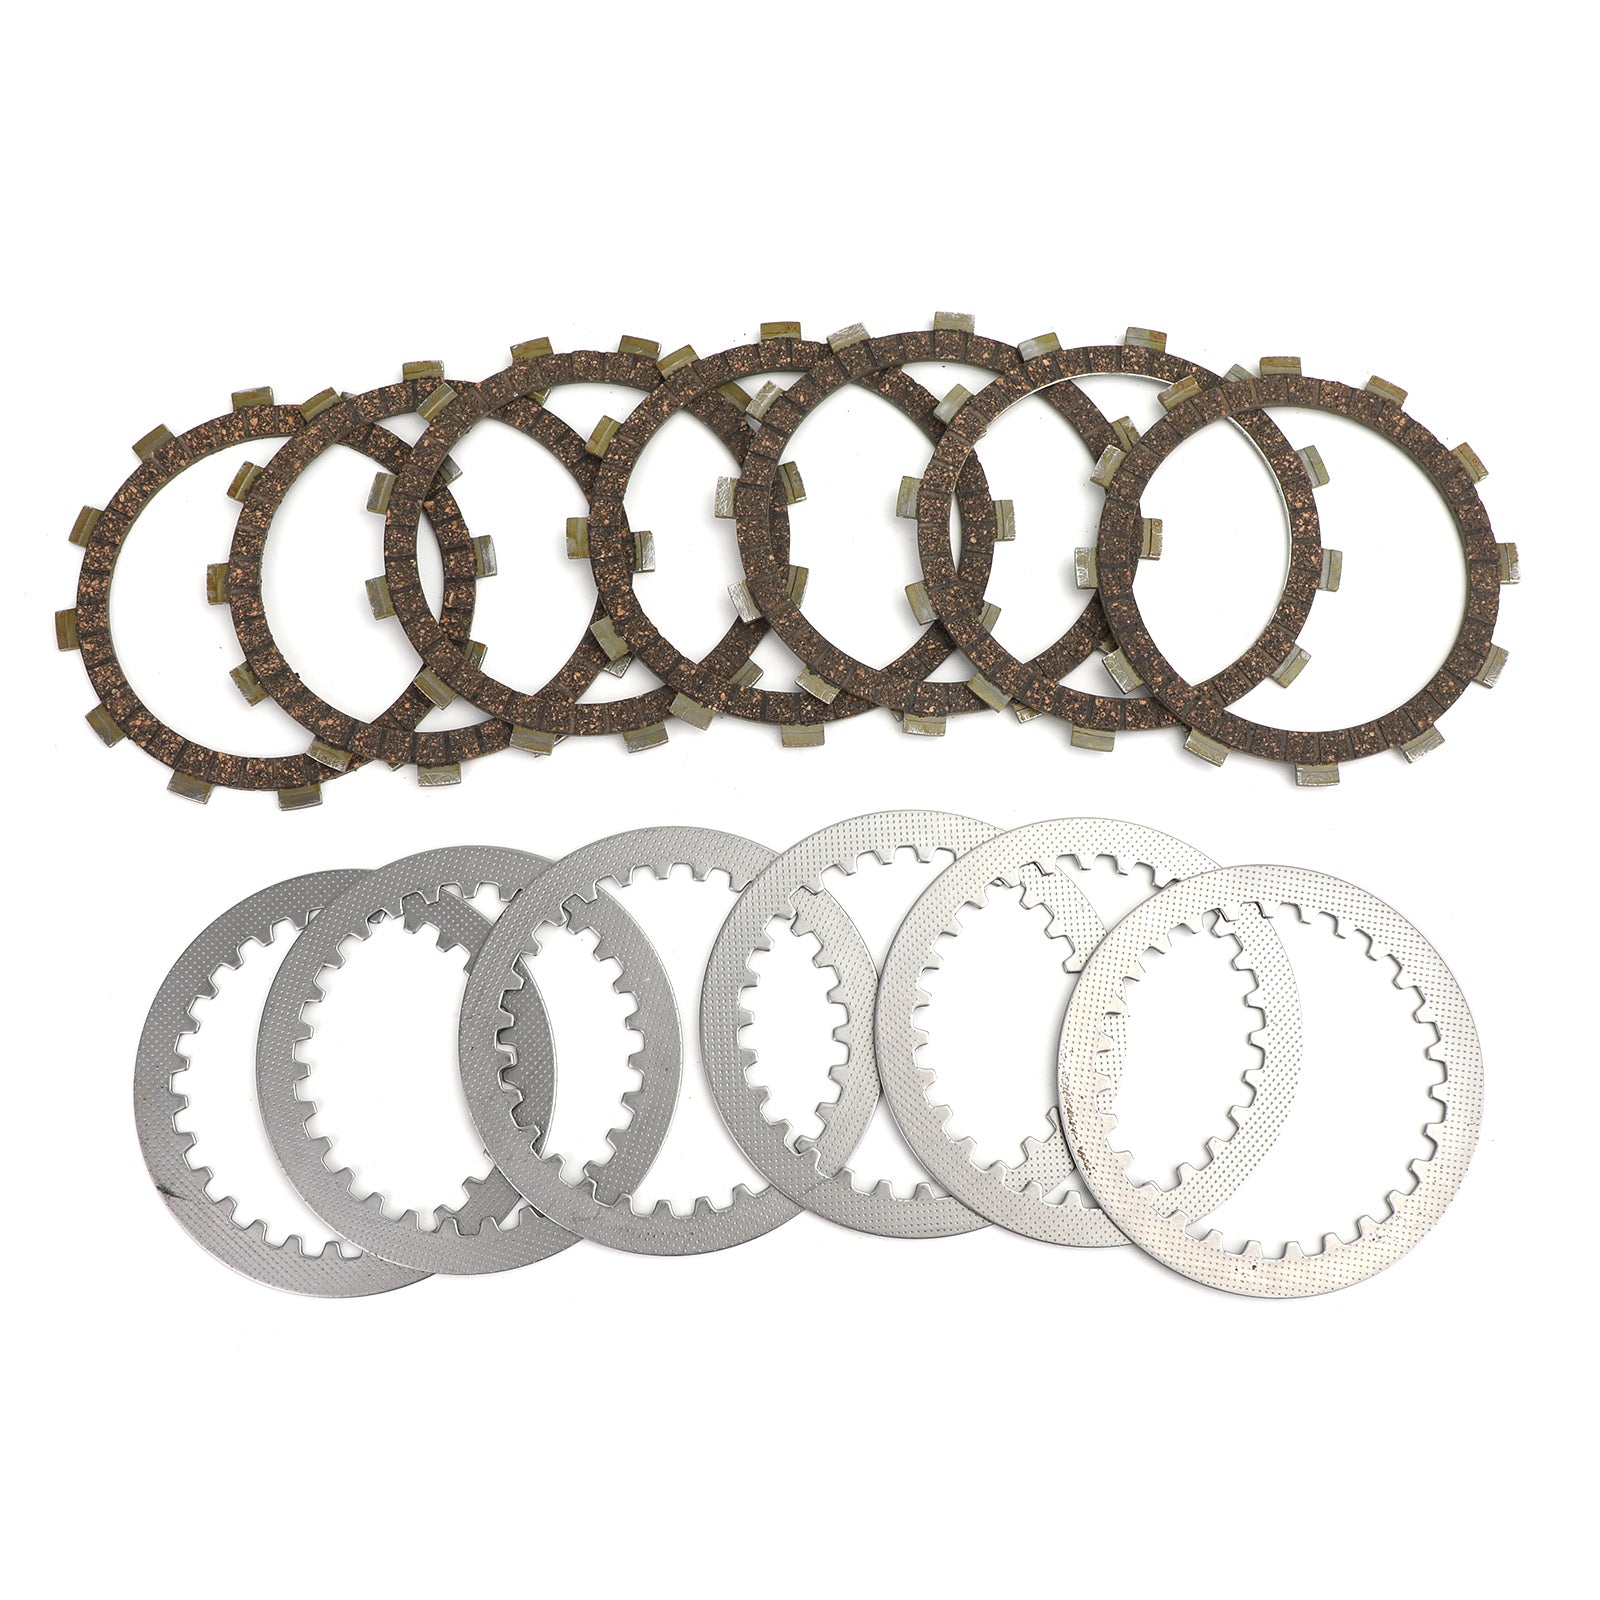 Clutch Kit Steel & Friction Plates fit for Yamaha XS250 XS400 IT250 IT465